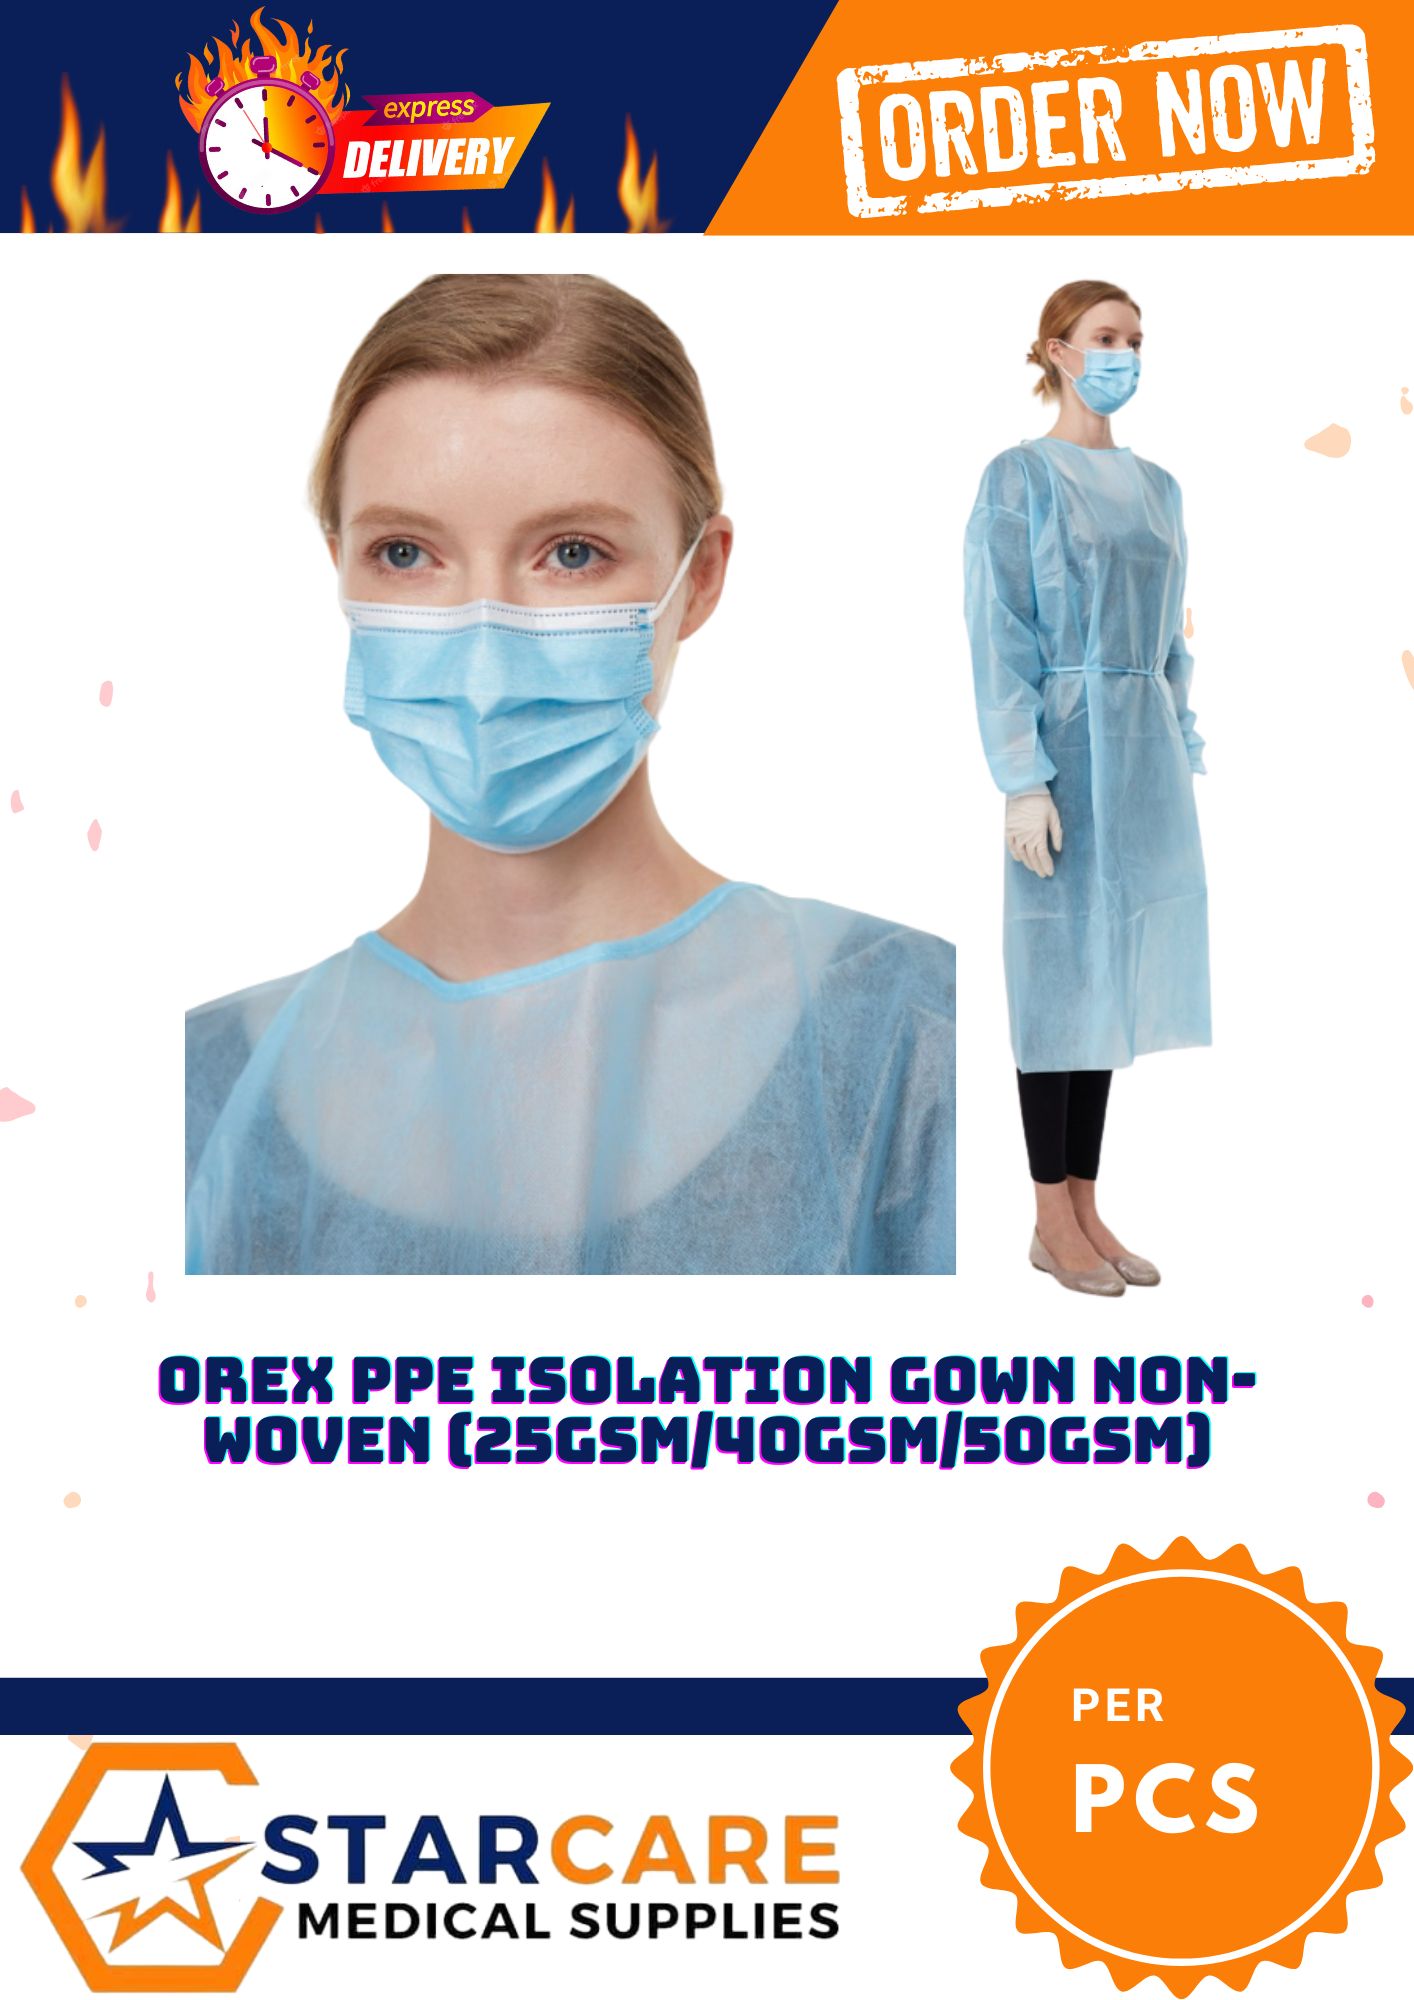 OREX PPE Isolation Gown Non-Woven (25gsm/40gsm/50gsm) | Lazada PH